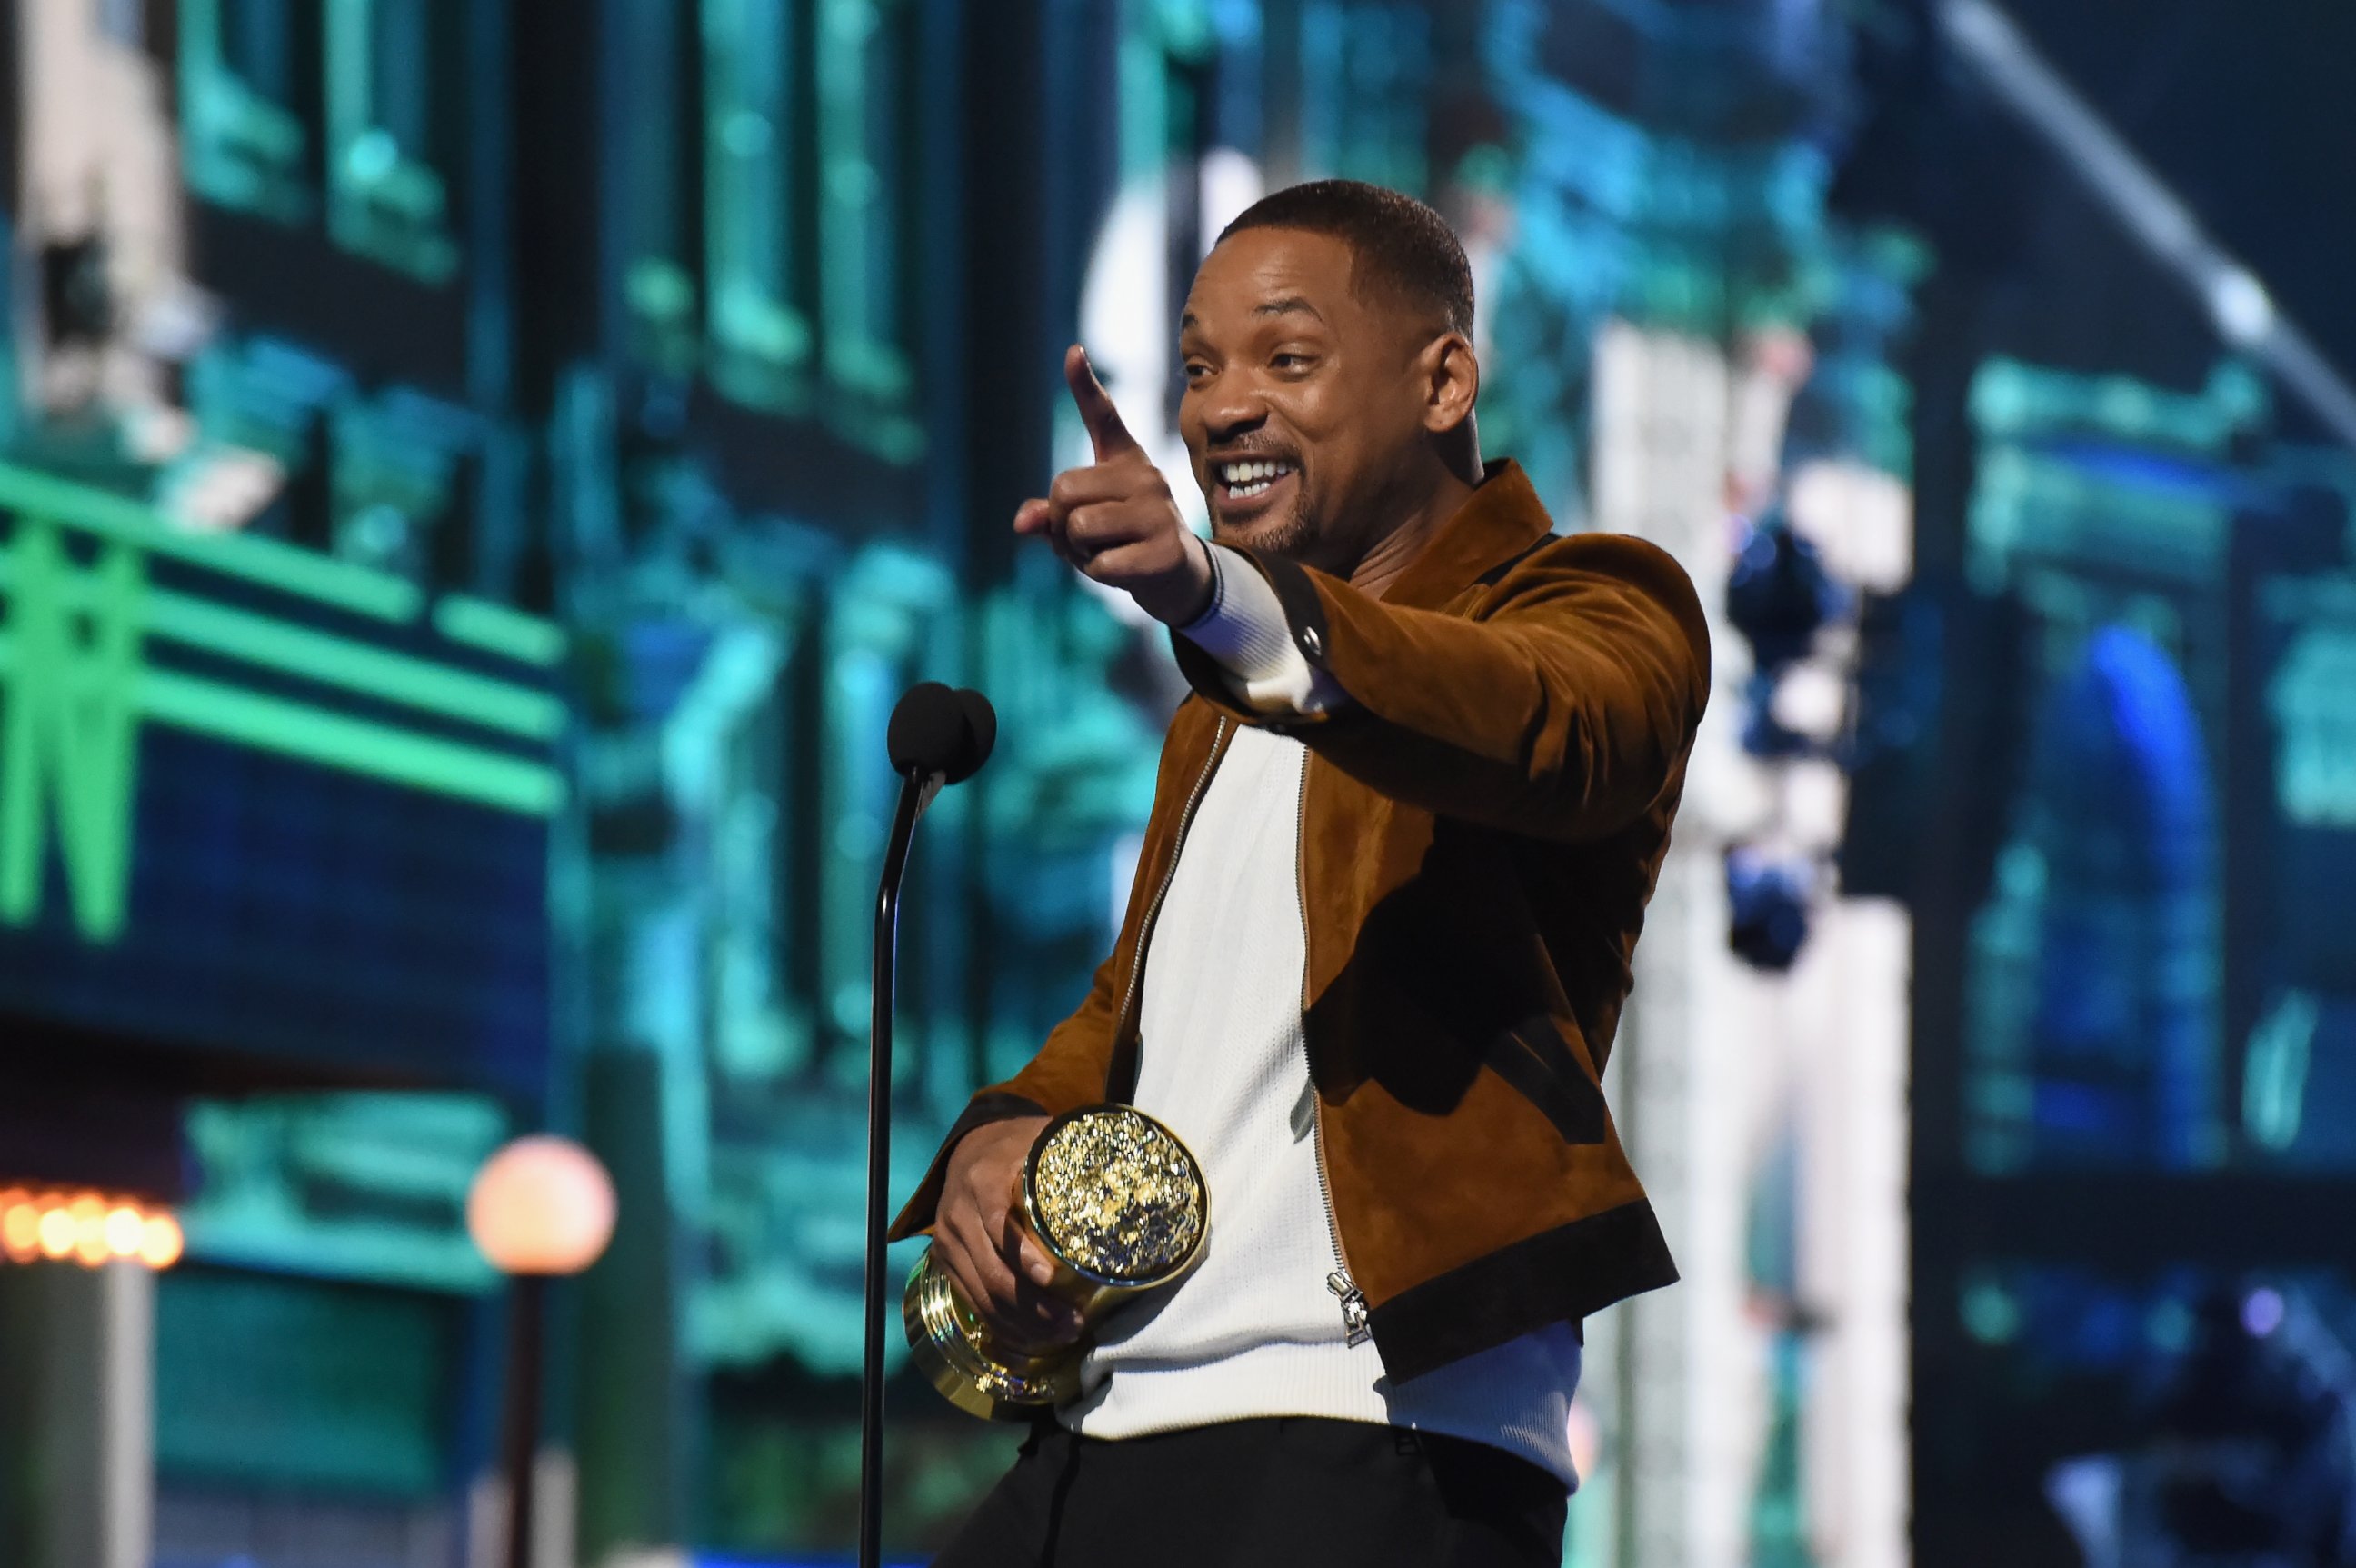 PHOTO: Actor Will Smith accepts the Generation Award onstage during the 2016 MTV Movie Awards at Warner Bros. Studios on April 9, 2016 in Burbank, California. 